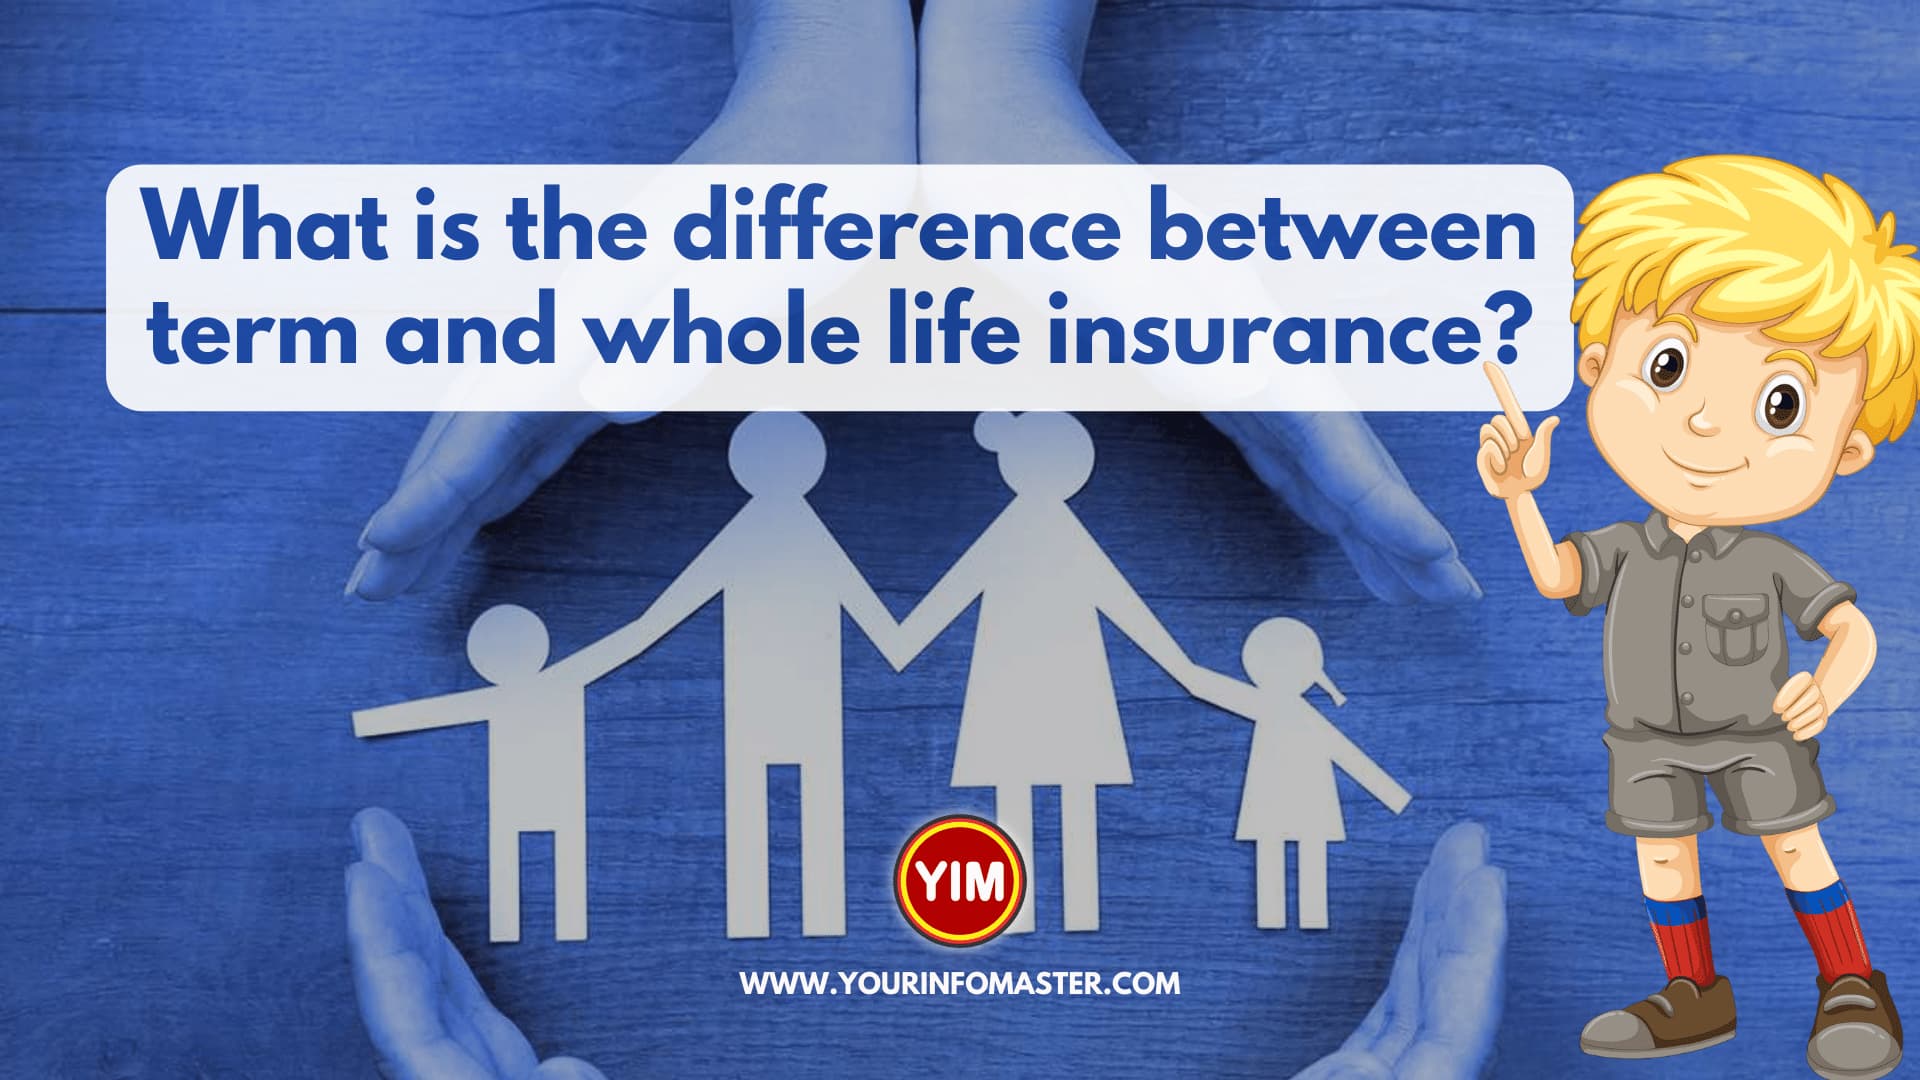 What is the difference between term and whole life insurance